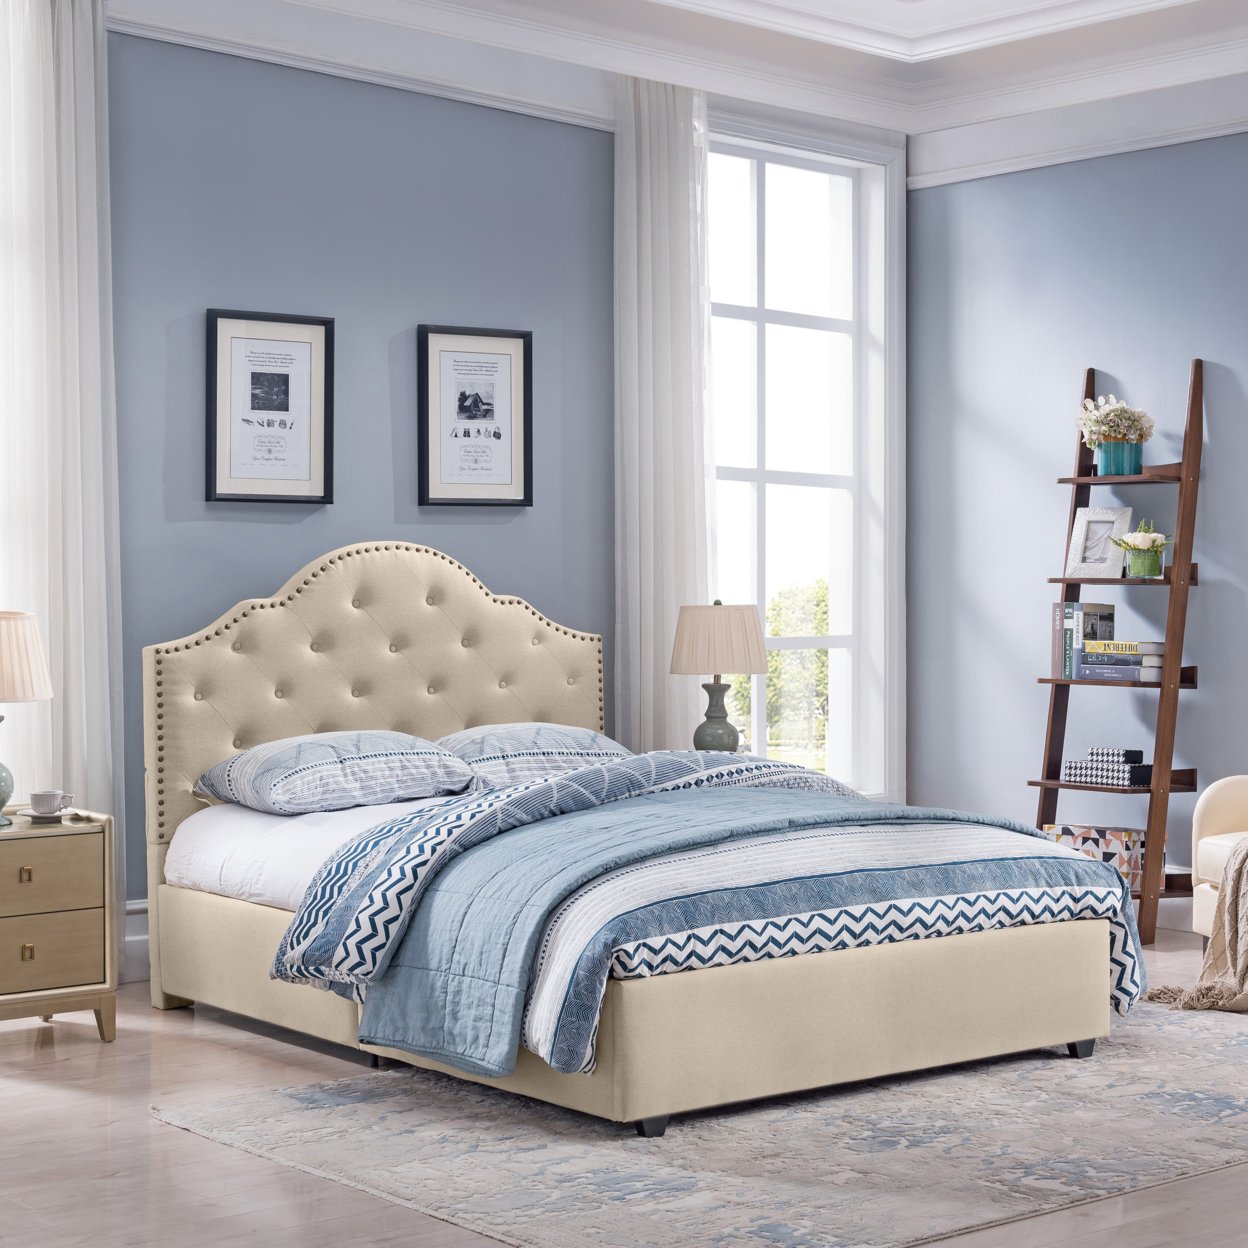 Gentry Contemporary Button-Tufted Upholstered Queen Bed Frame With Nailhead Accents - Light Gray